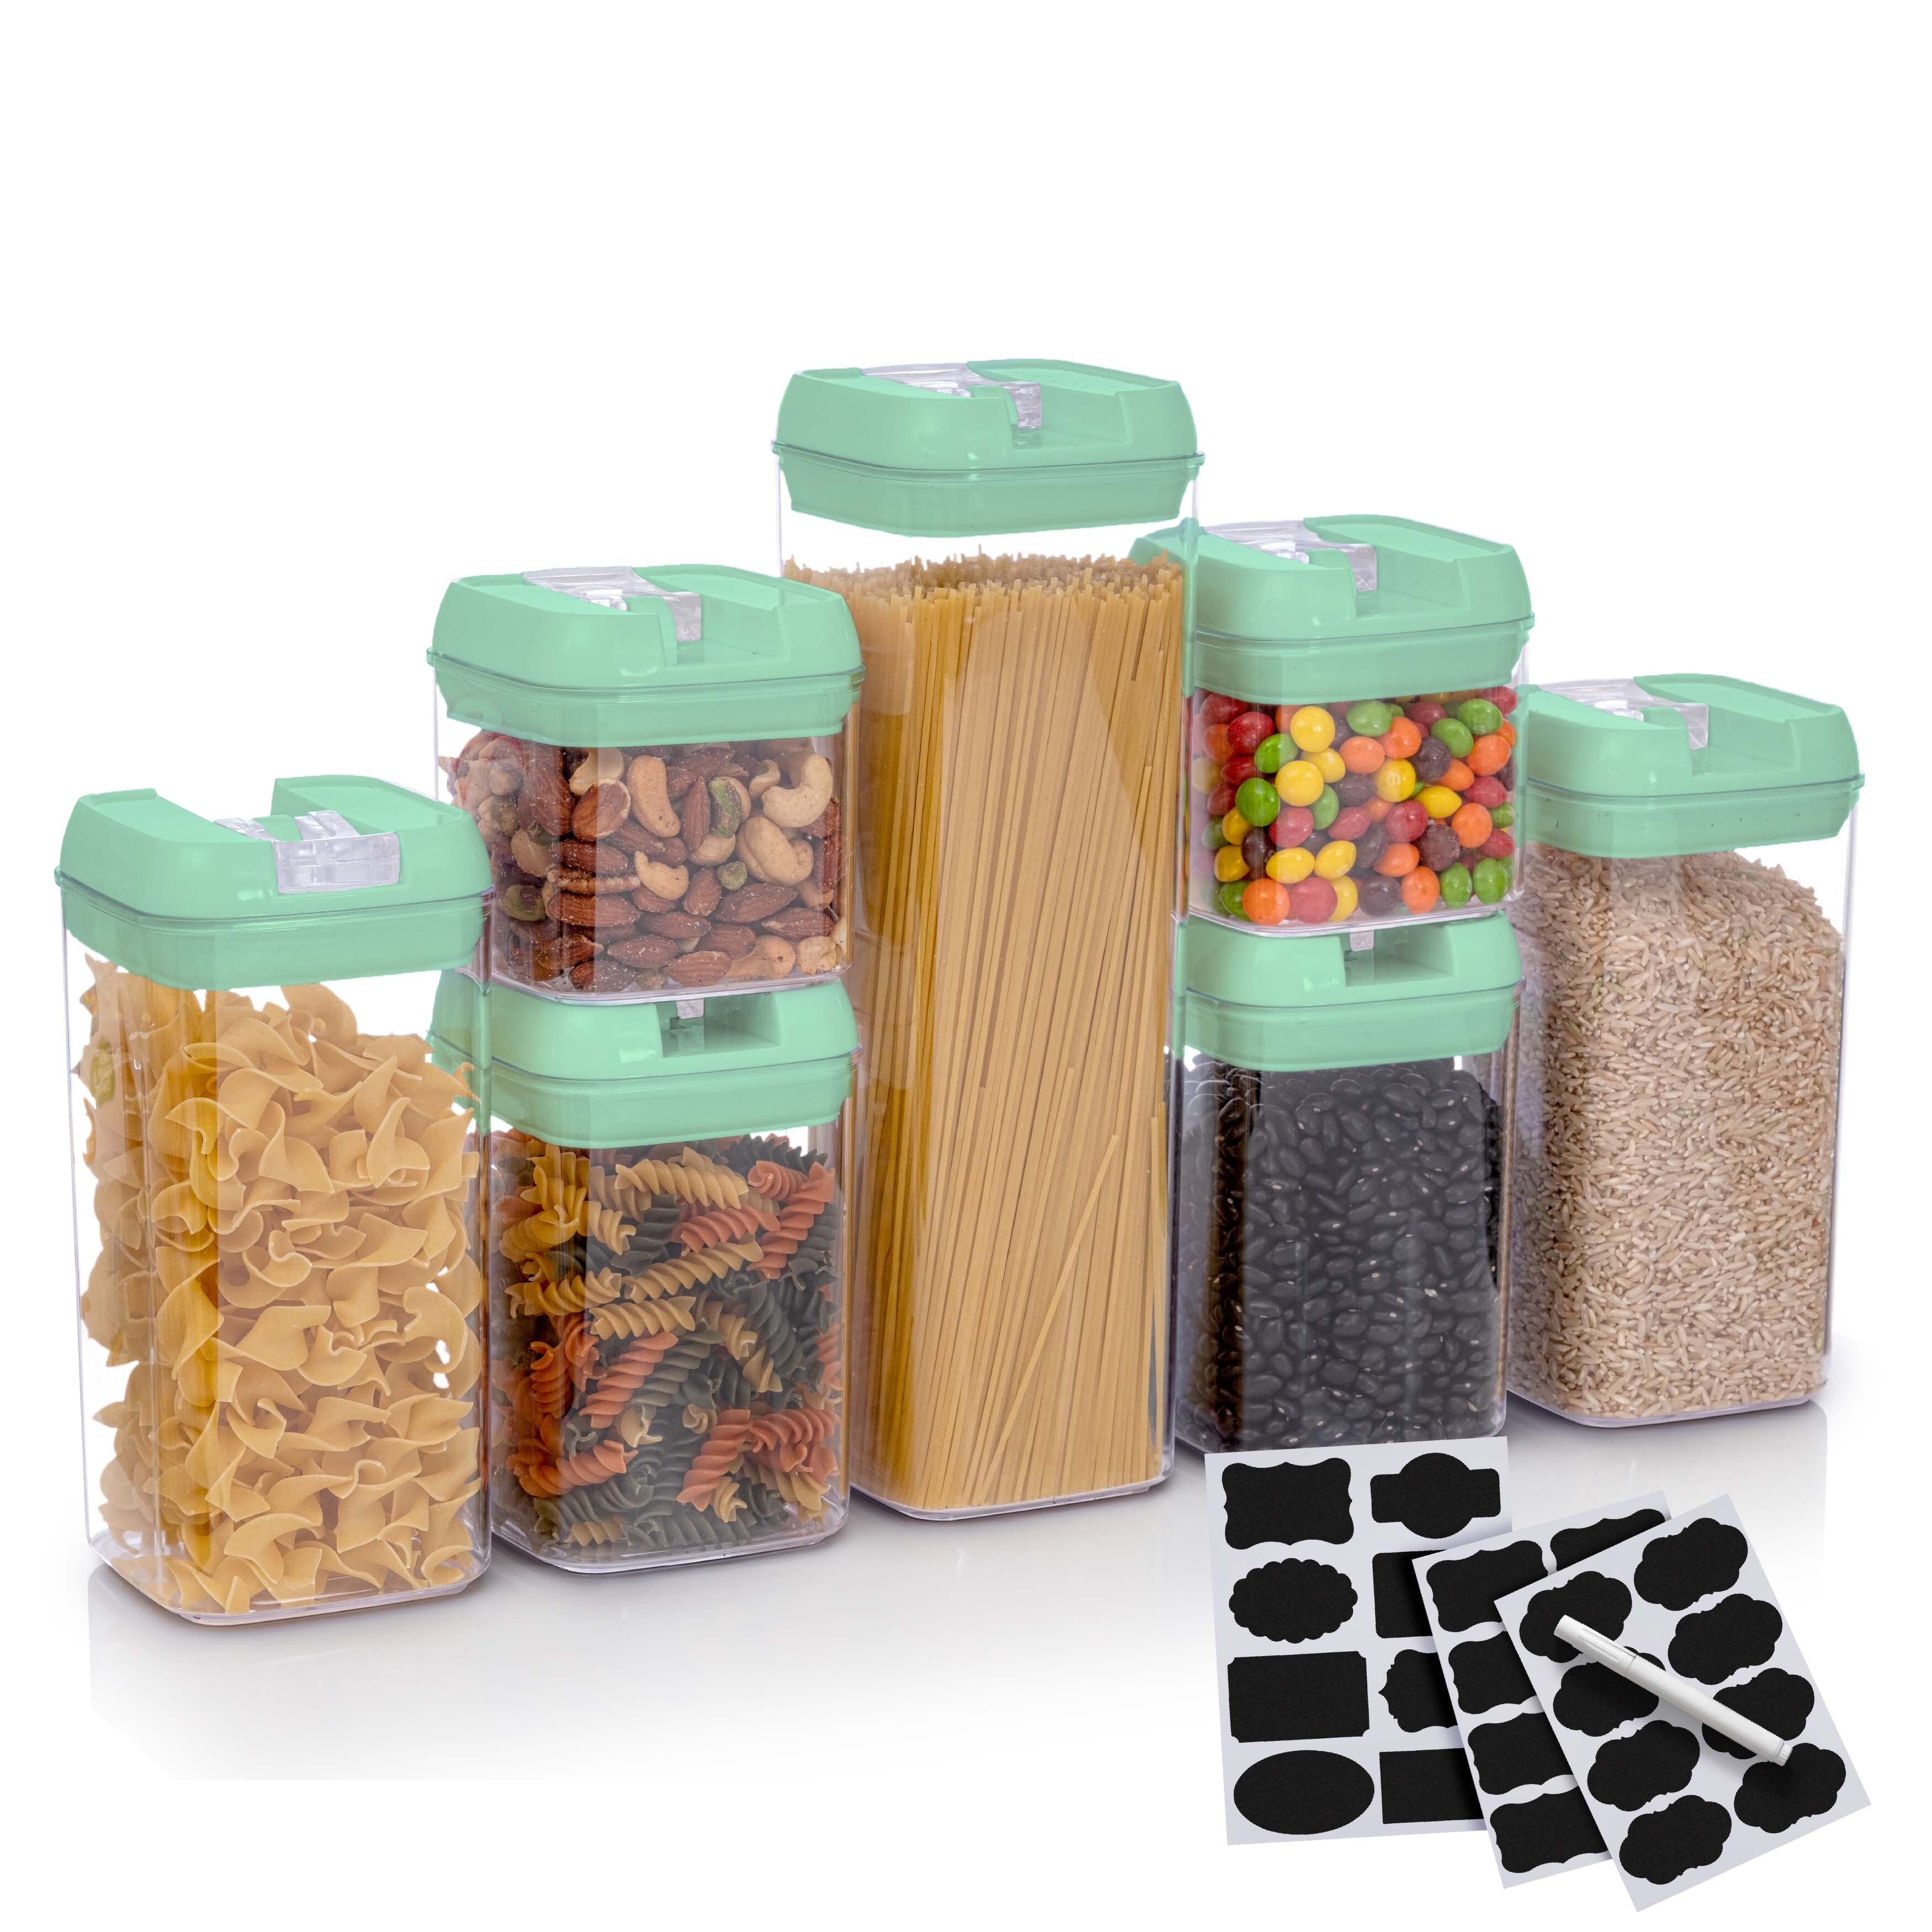 https://ak1.ostkcdn.com/images/products/is/images/direct/c4835ac82e176fa4bc50b1d7a6b527072b2c0fe4/Cheer-Collection-7-piece-Stackable-Airtight-Food-Storage-Container-Set.jpg